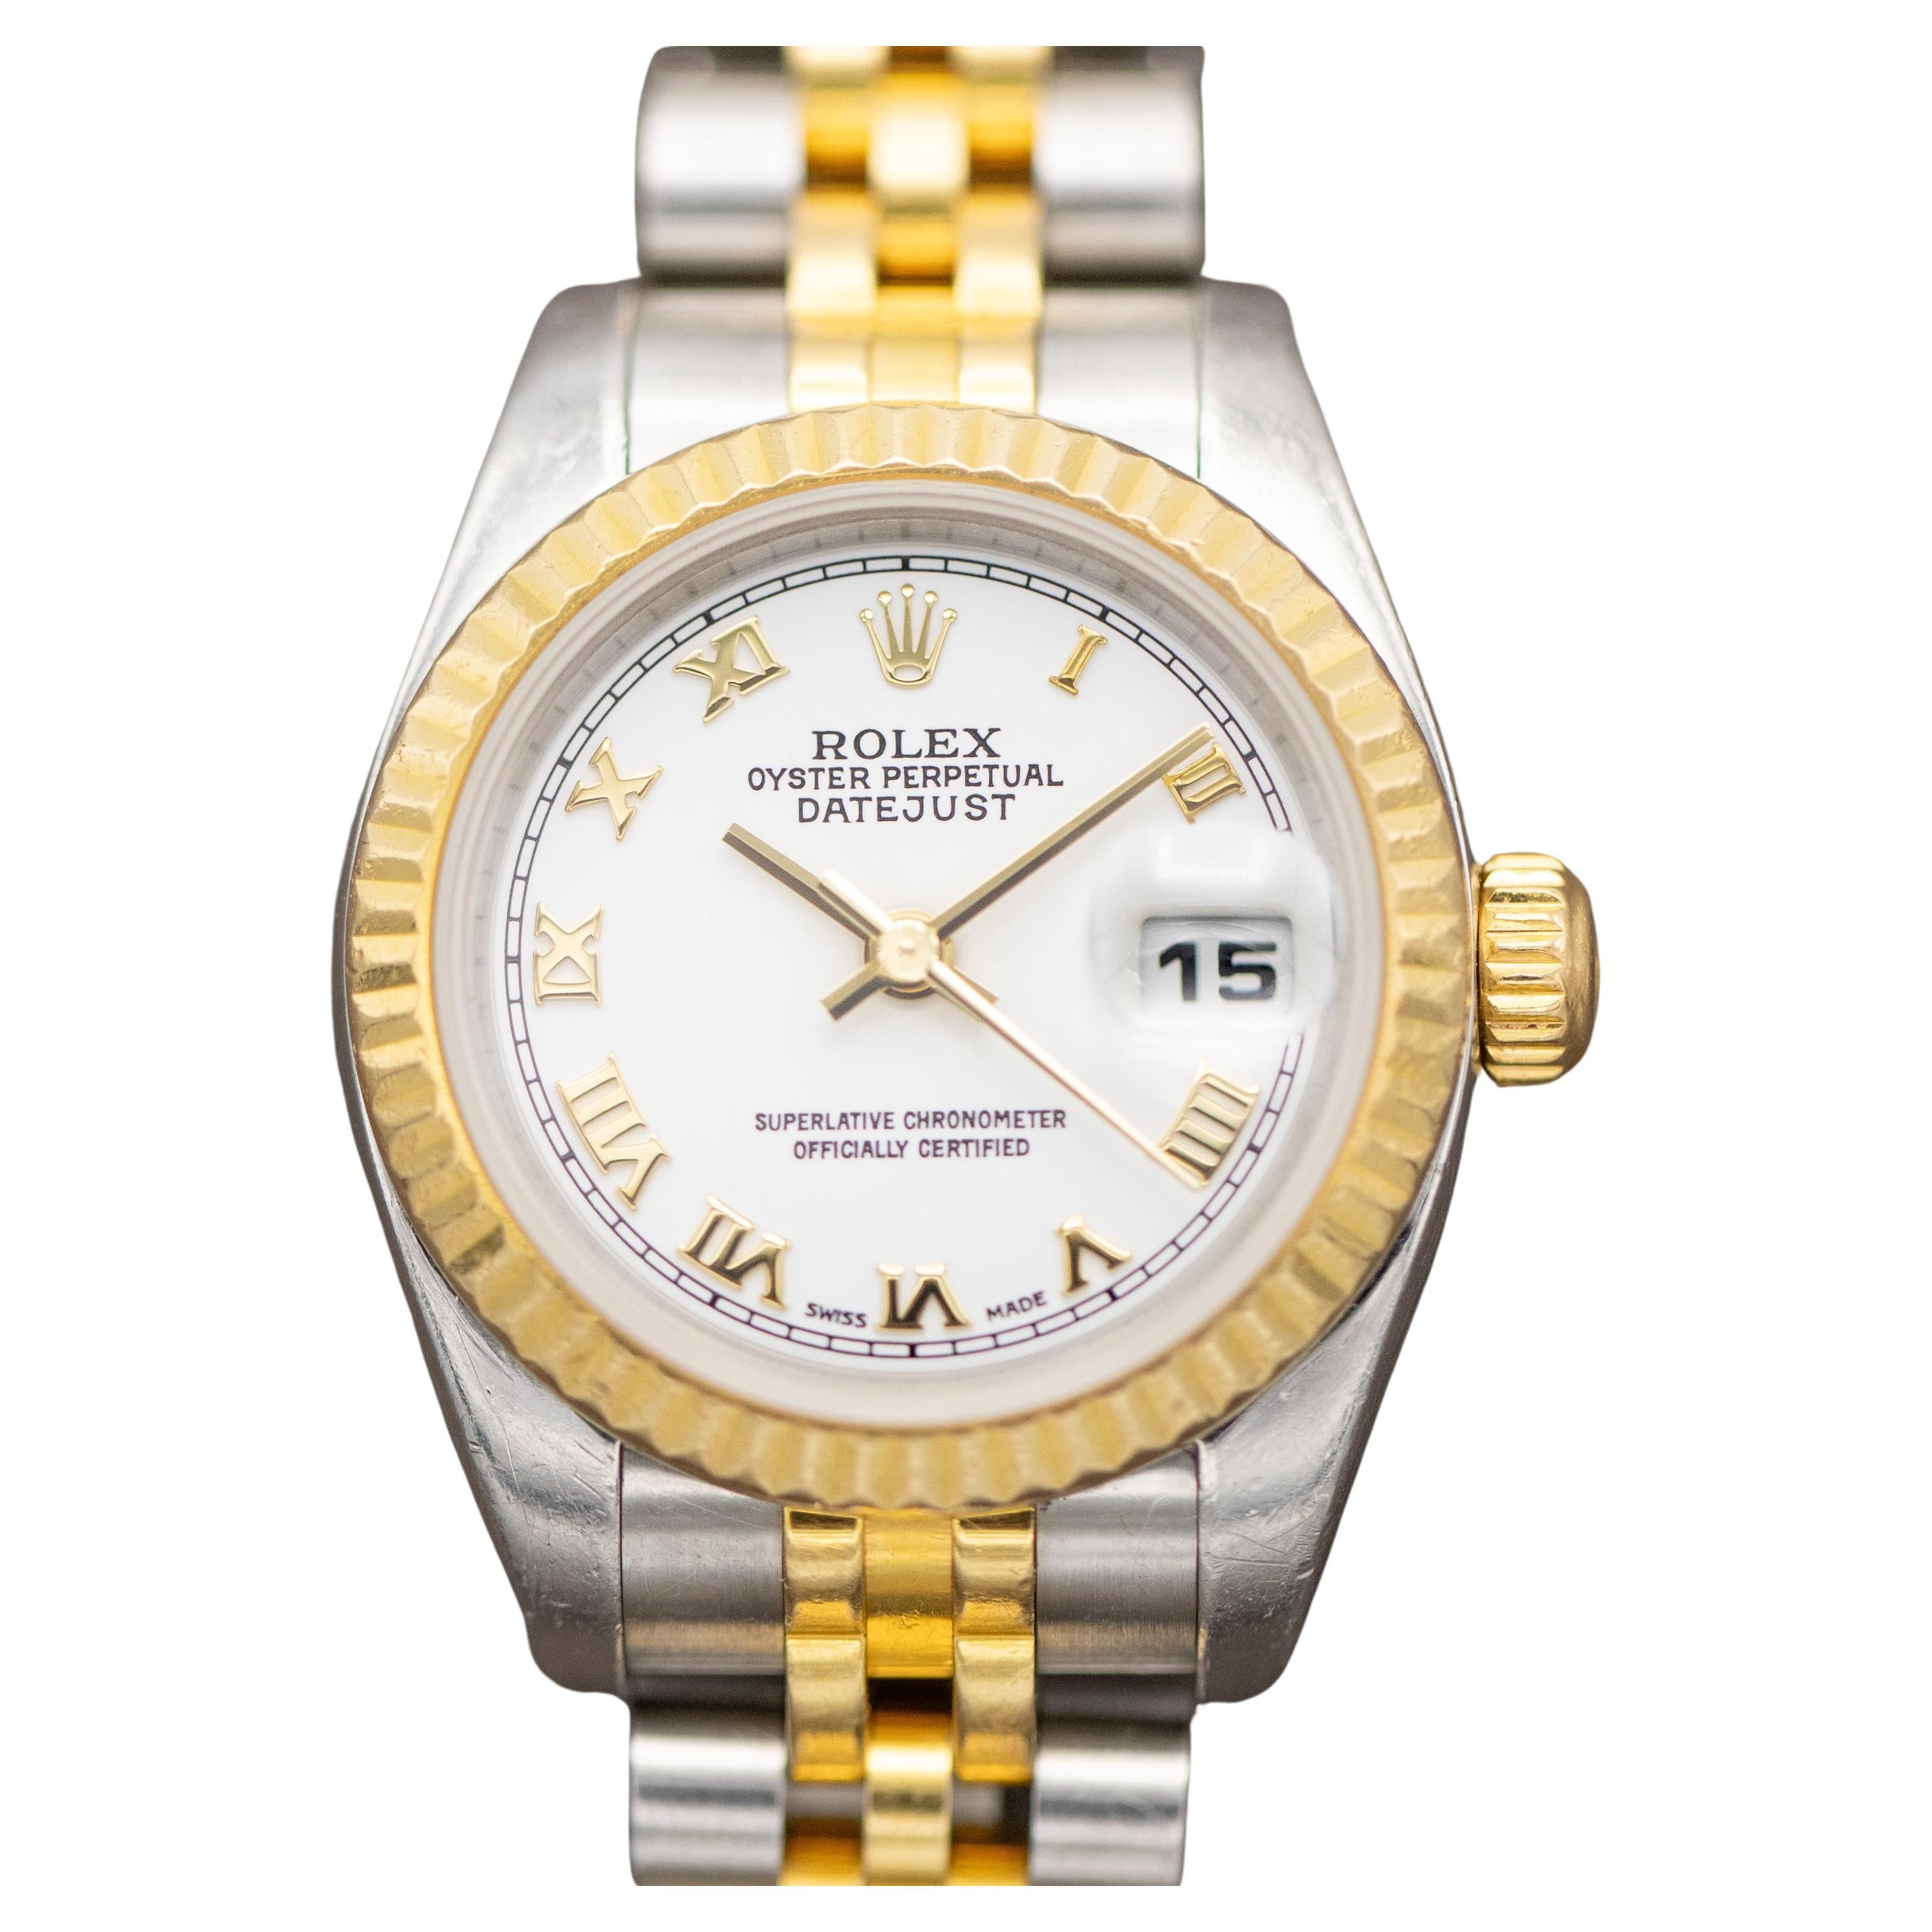 Rolex Oyster Perpetual Lady Datejust Automatic - Vintage Ladies' Watch - Jubilee